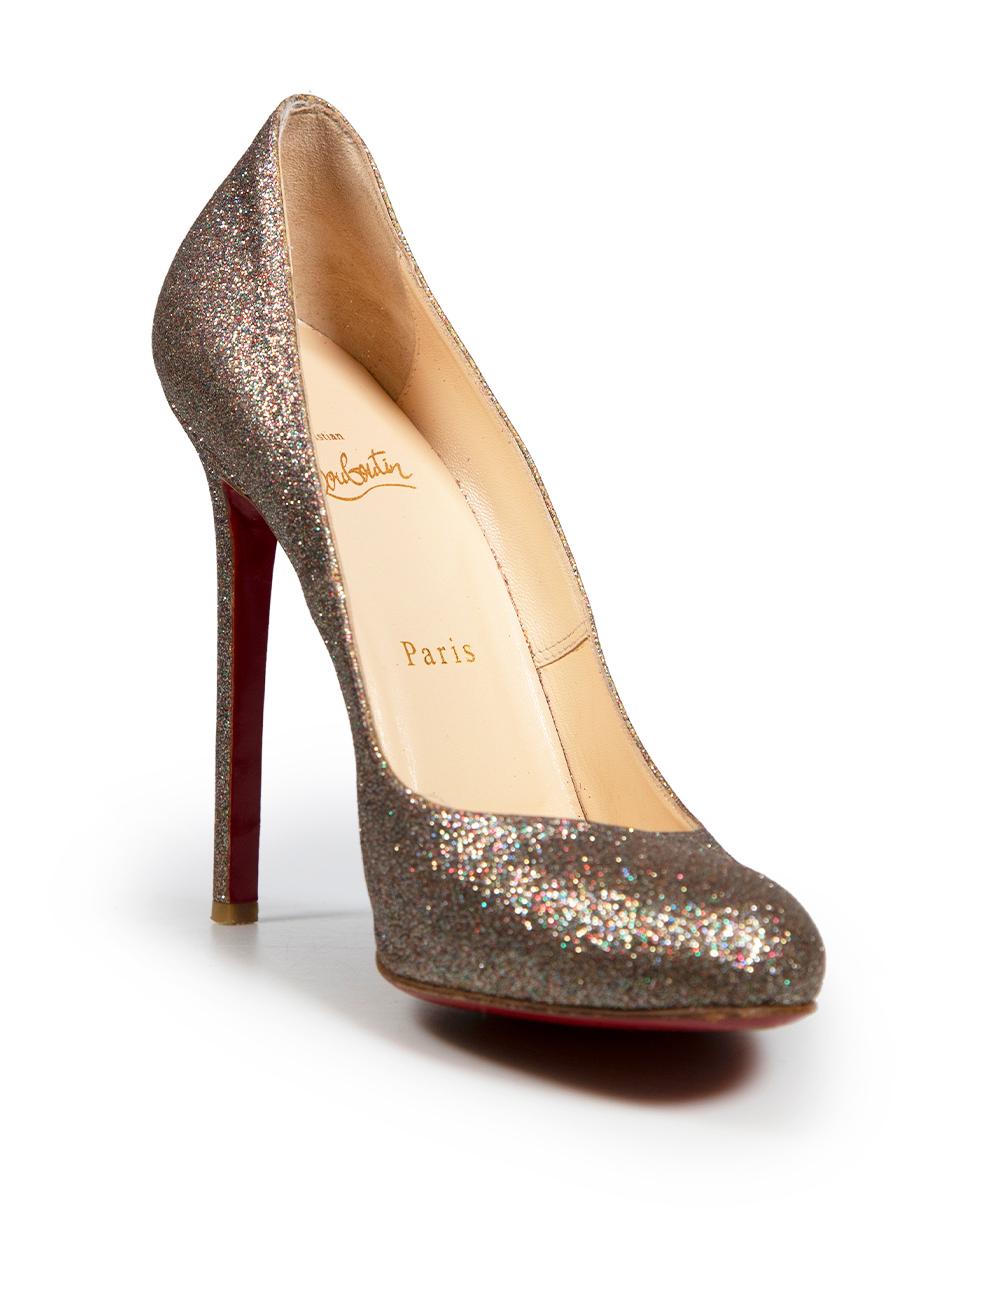 CONDITION is Good. Minor wear to shoes is evident. Light wear to both shoe heels and the left-side of the right shoe with discoloured marks and loose stitching on this used Christian Louboutin designer resale item.
 
 Details
 Metallic -